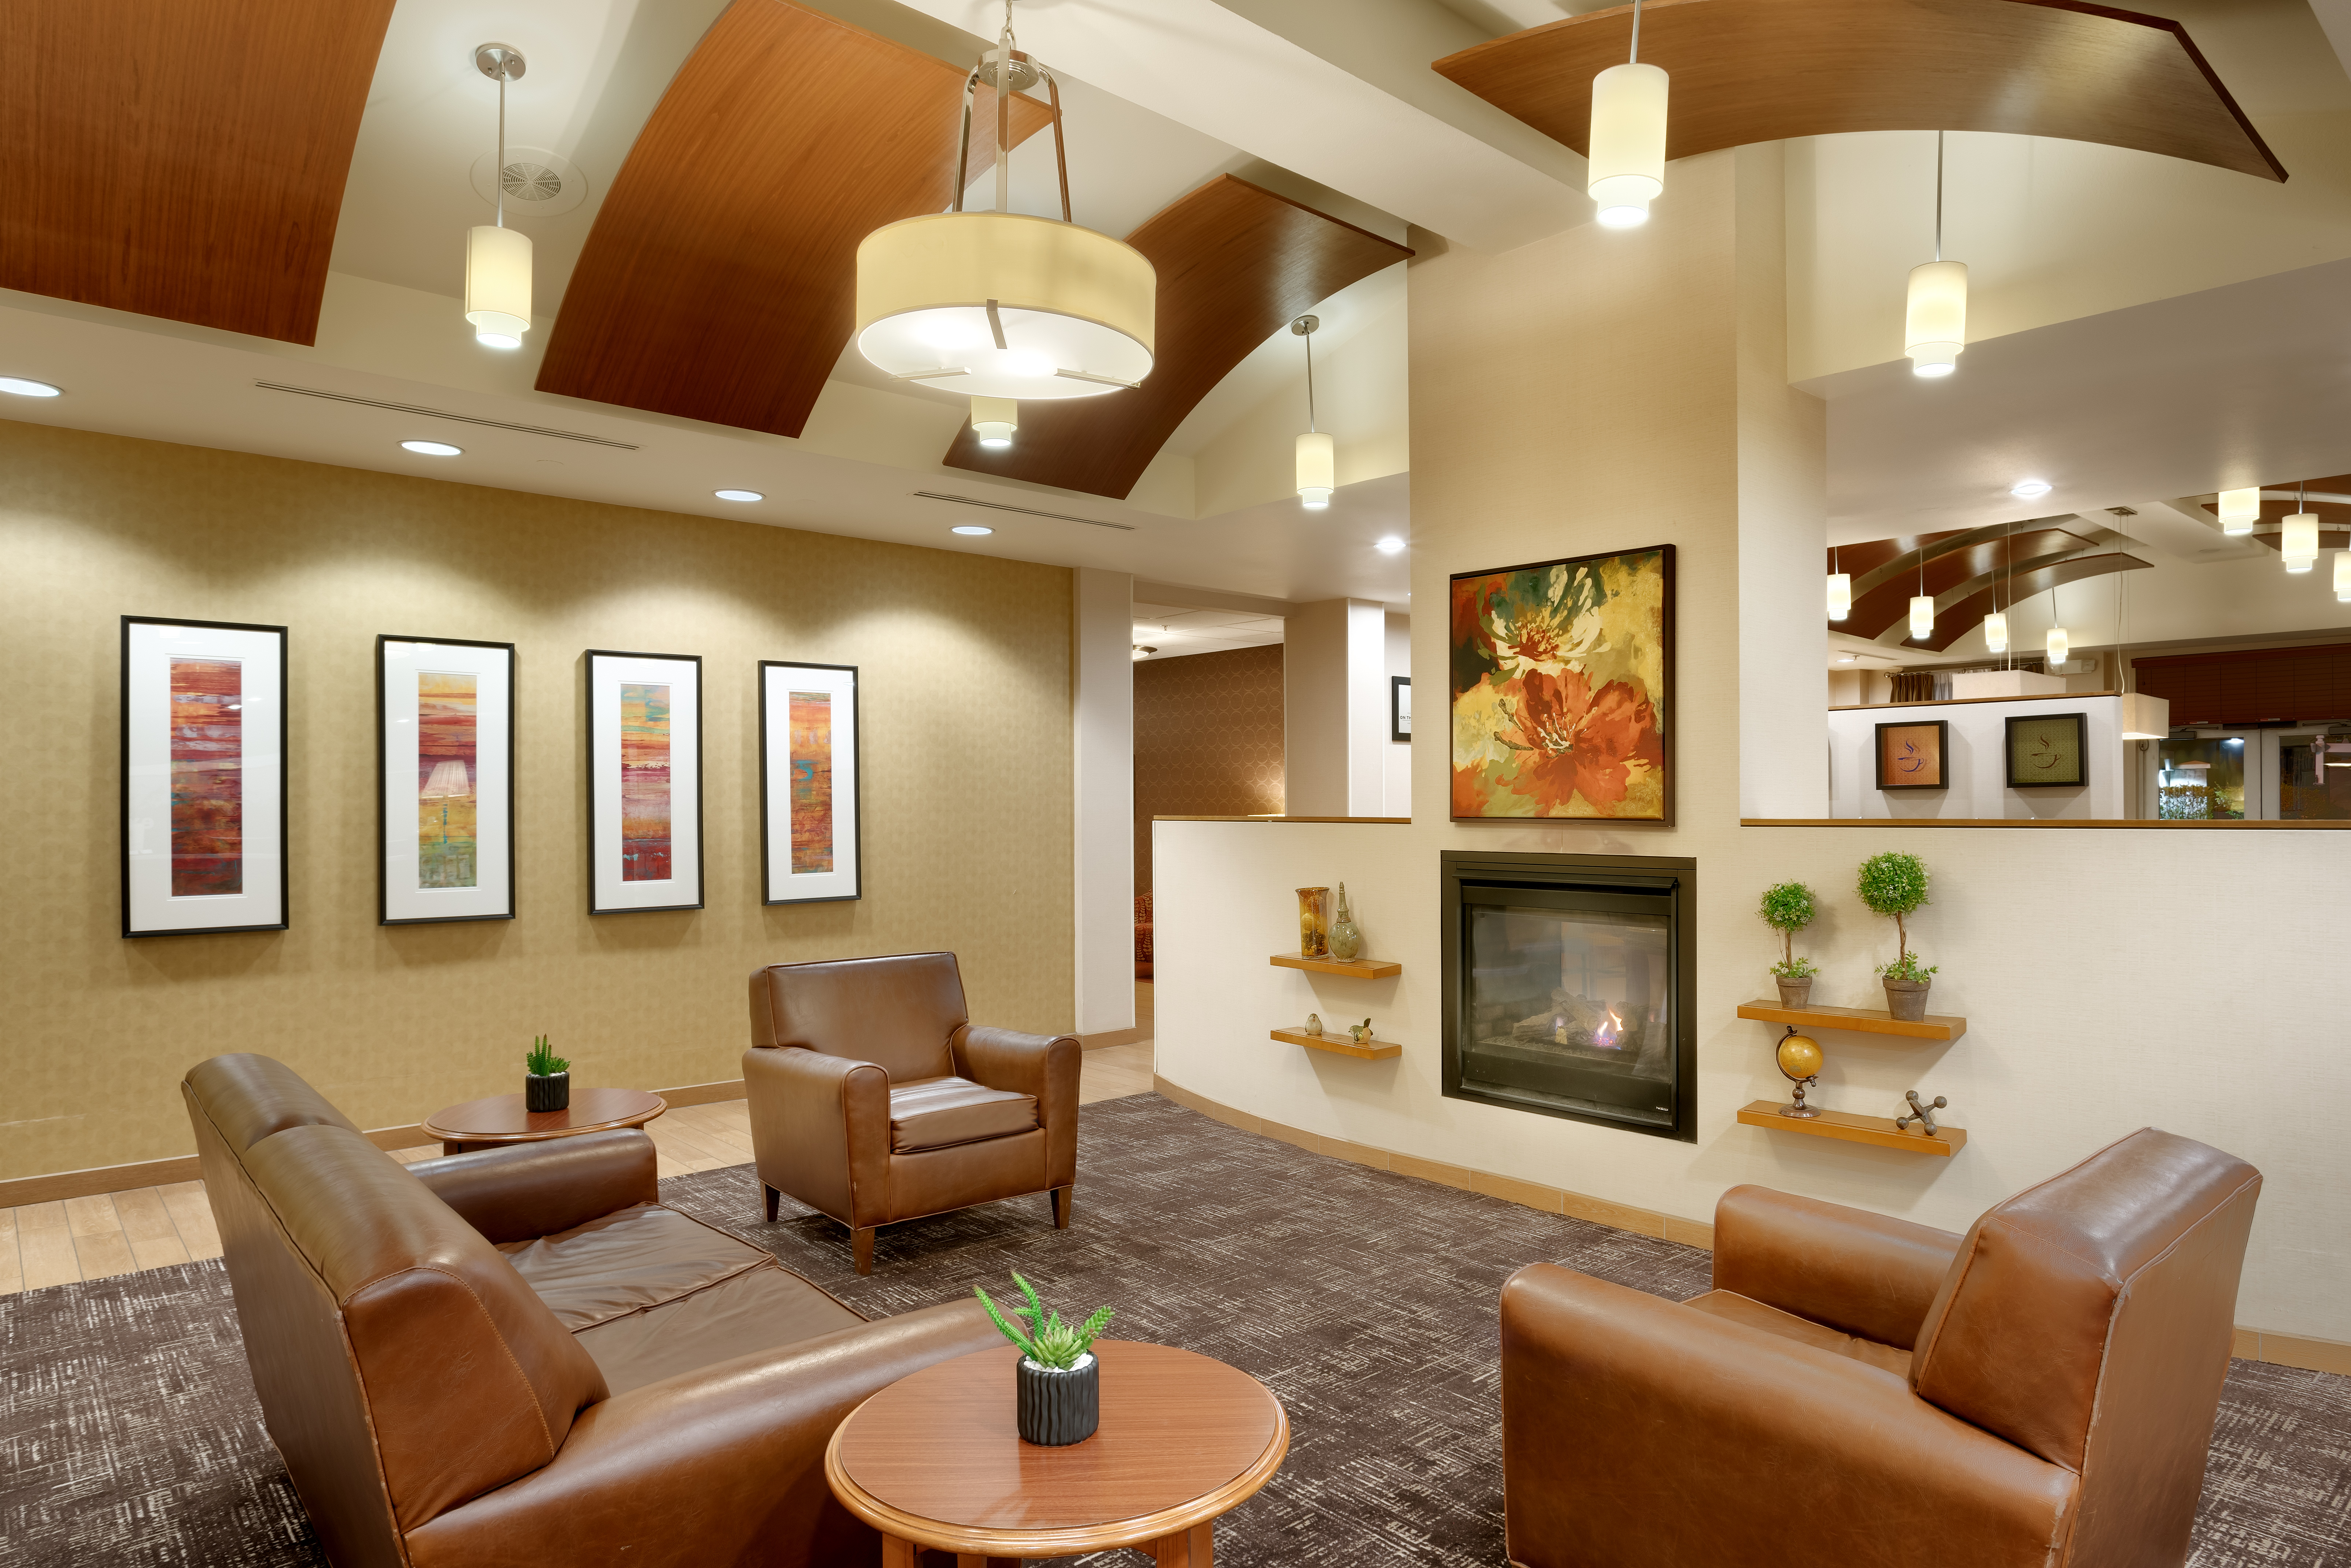 Lobby Seating, Fireplace and Decor